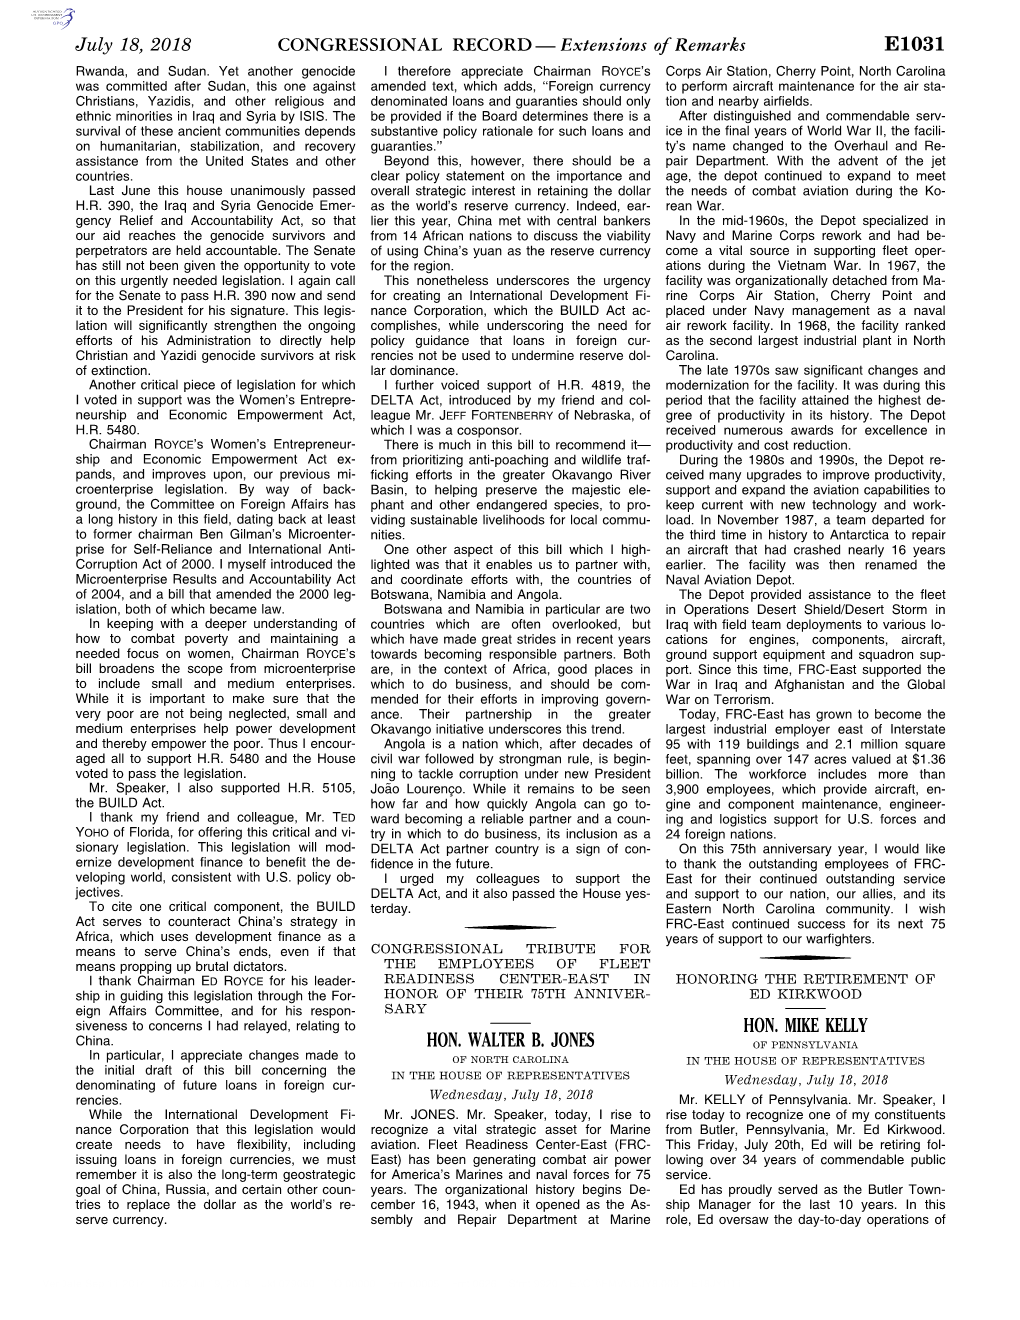 CONGRESSIONAL RECORD— Extensions of Remarks E1031 HON. WALTER B. JONES HON. MIKE KELLY